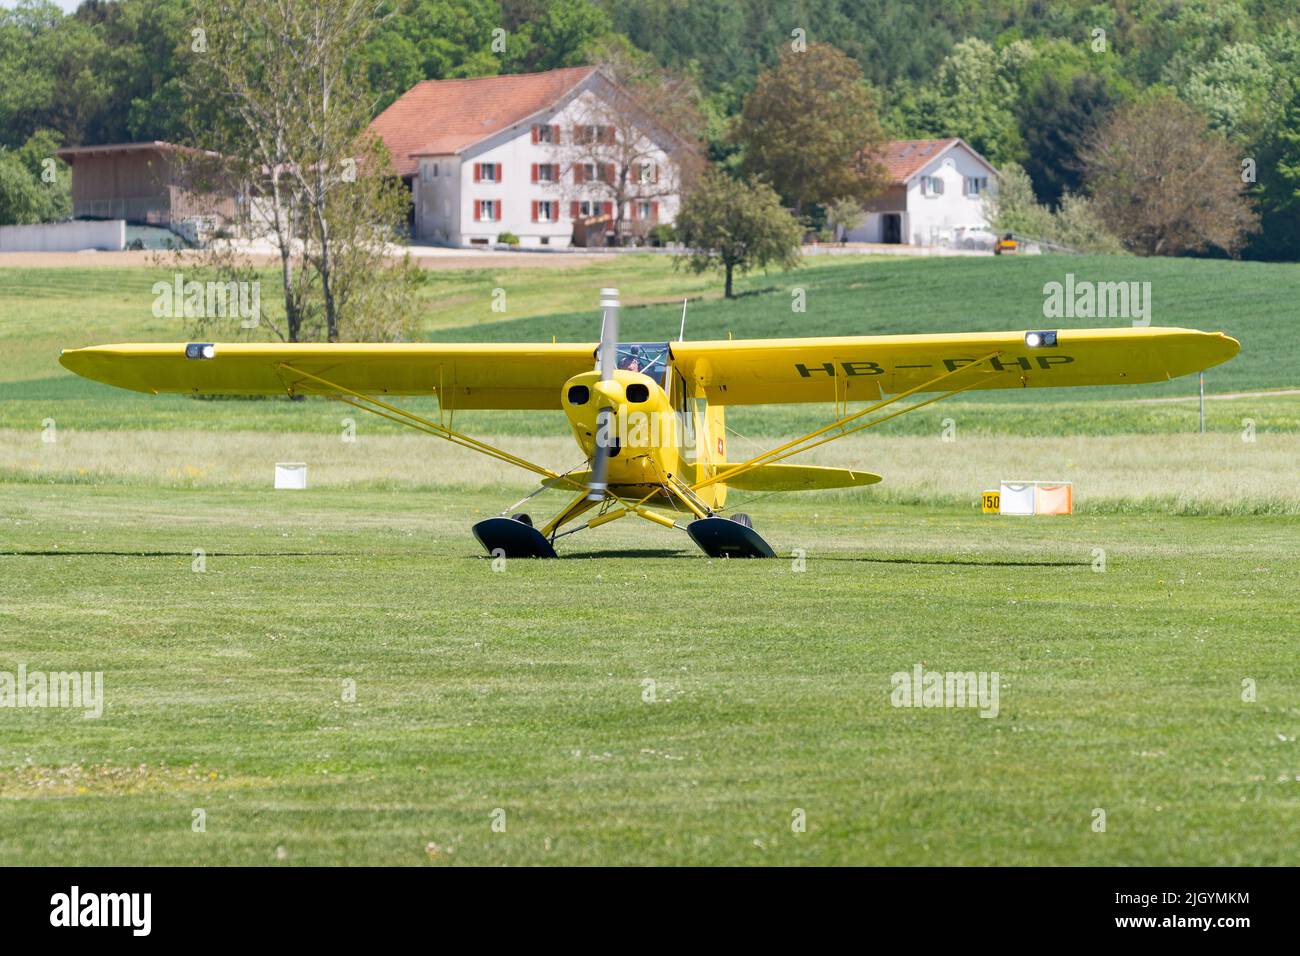 Lommis, Switzerland, May 11, 2022 Piper PA18-150 Super Cub propeller plane is taxiing on the grass on a small airfield, Stock Photo